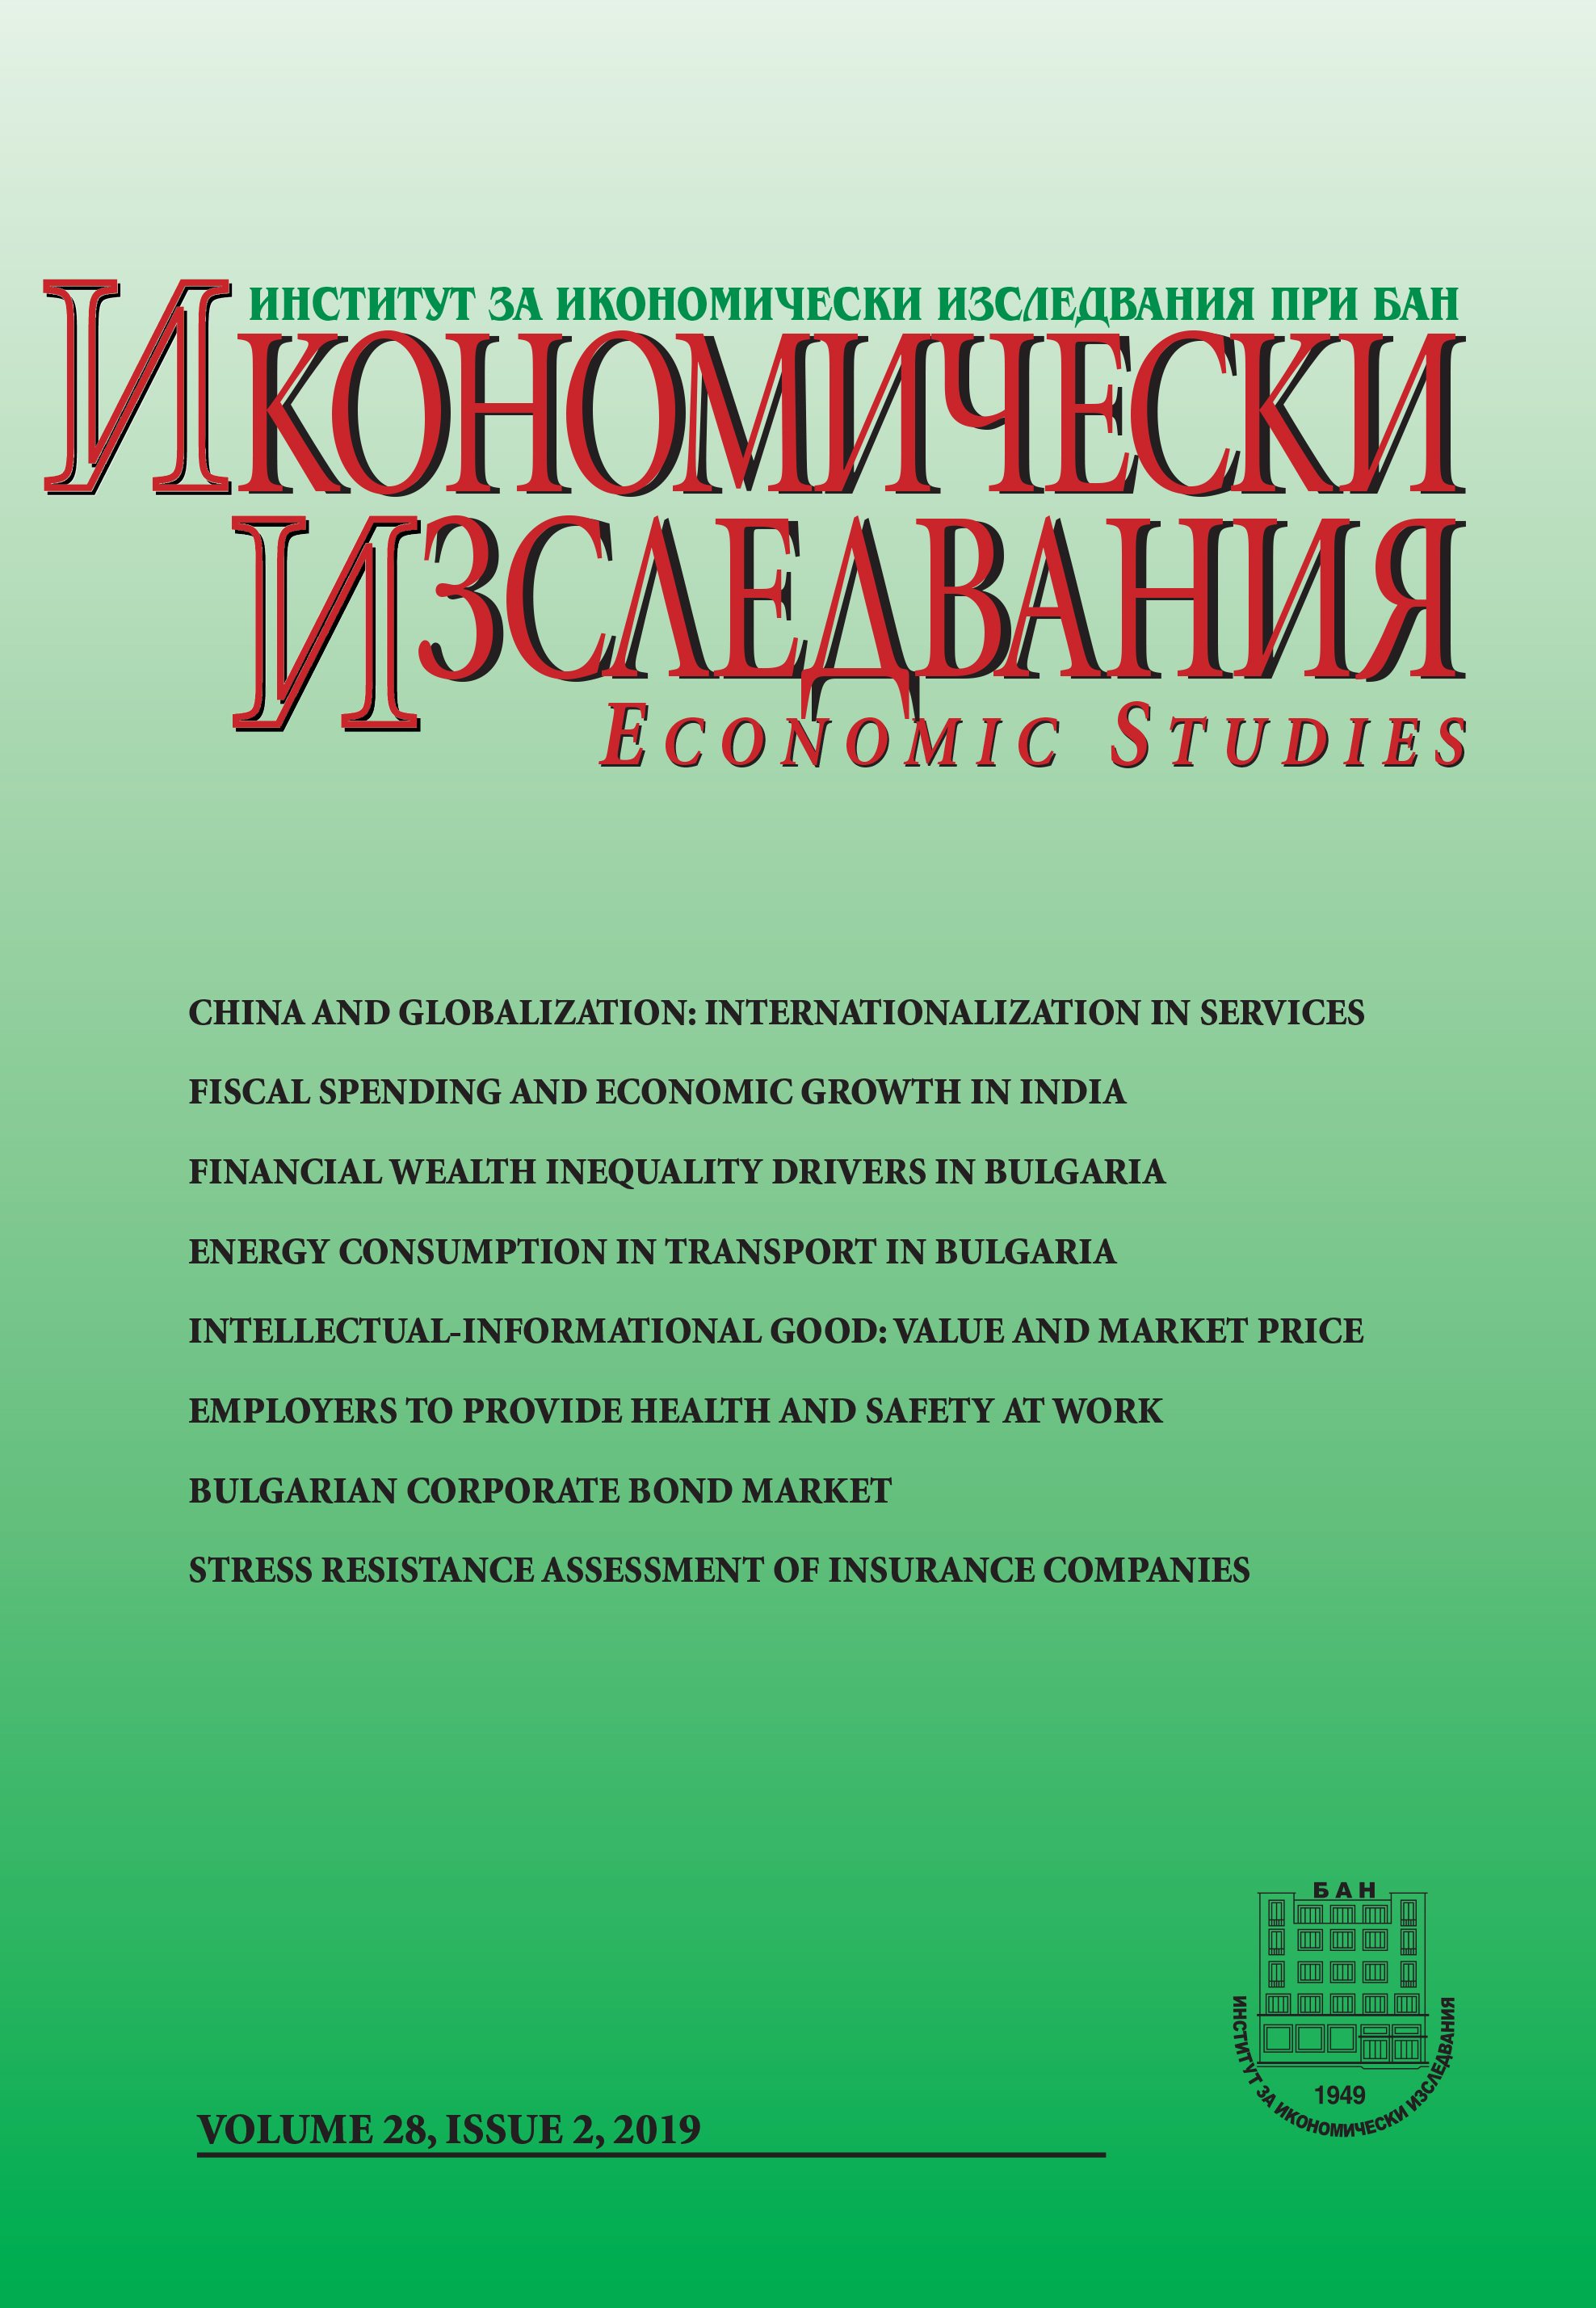 Energy Consumption in the Transport in Bulgaria in the Contemporary Conditions